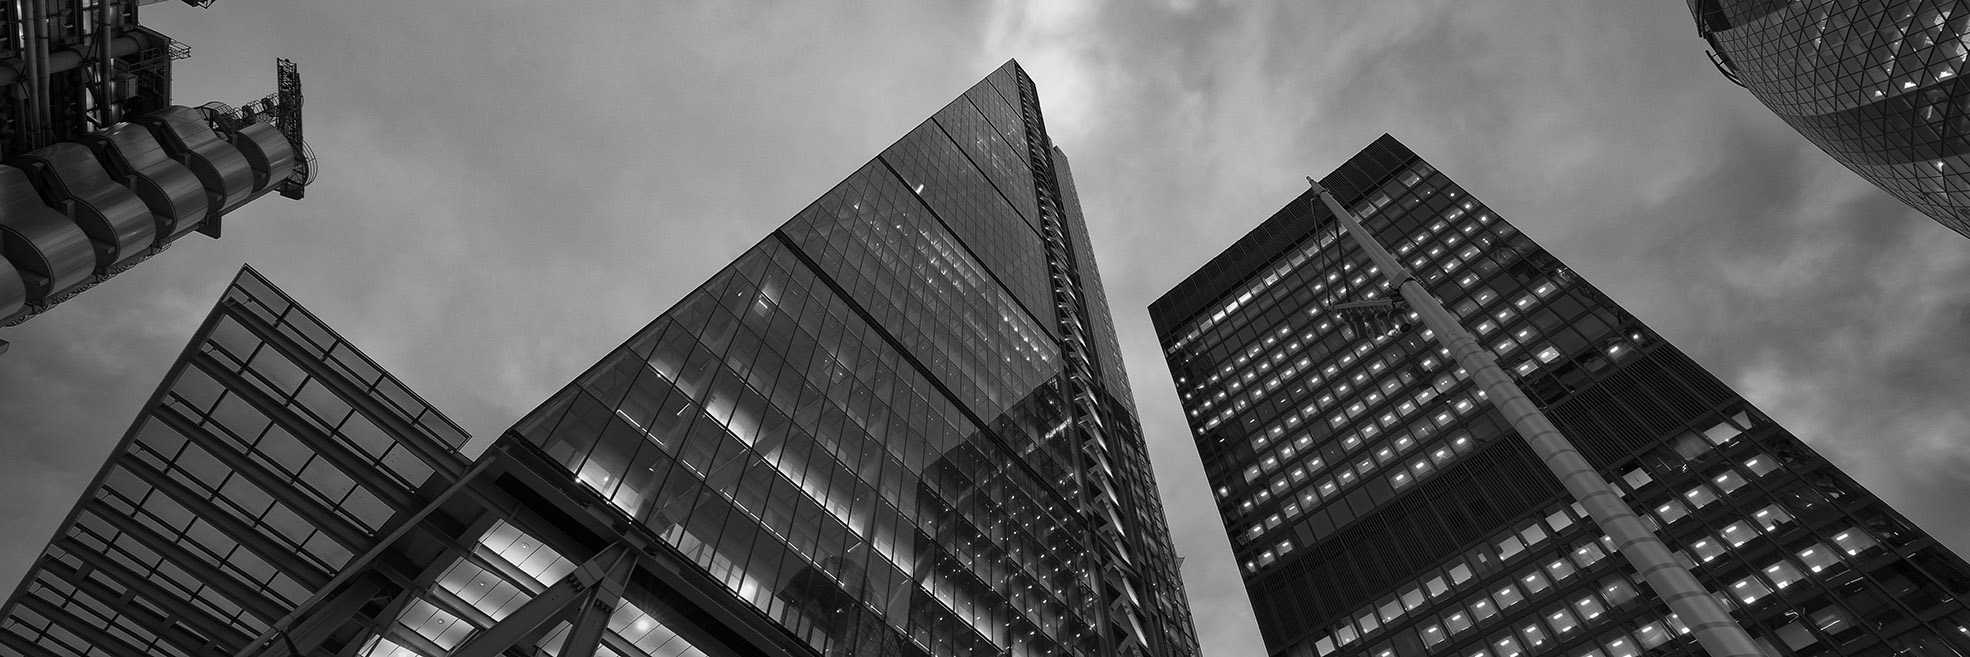 Panoramic black and white picture of City of London skyscrapers